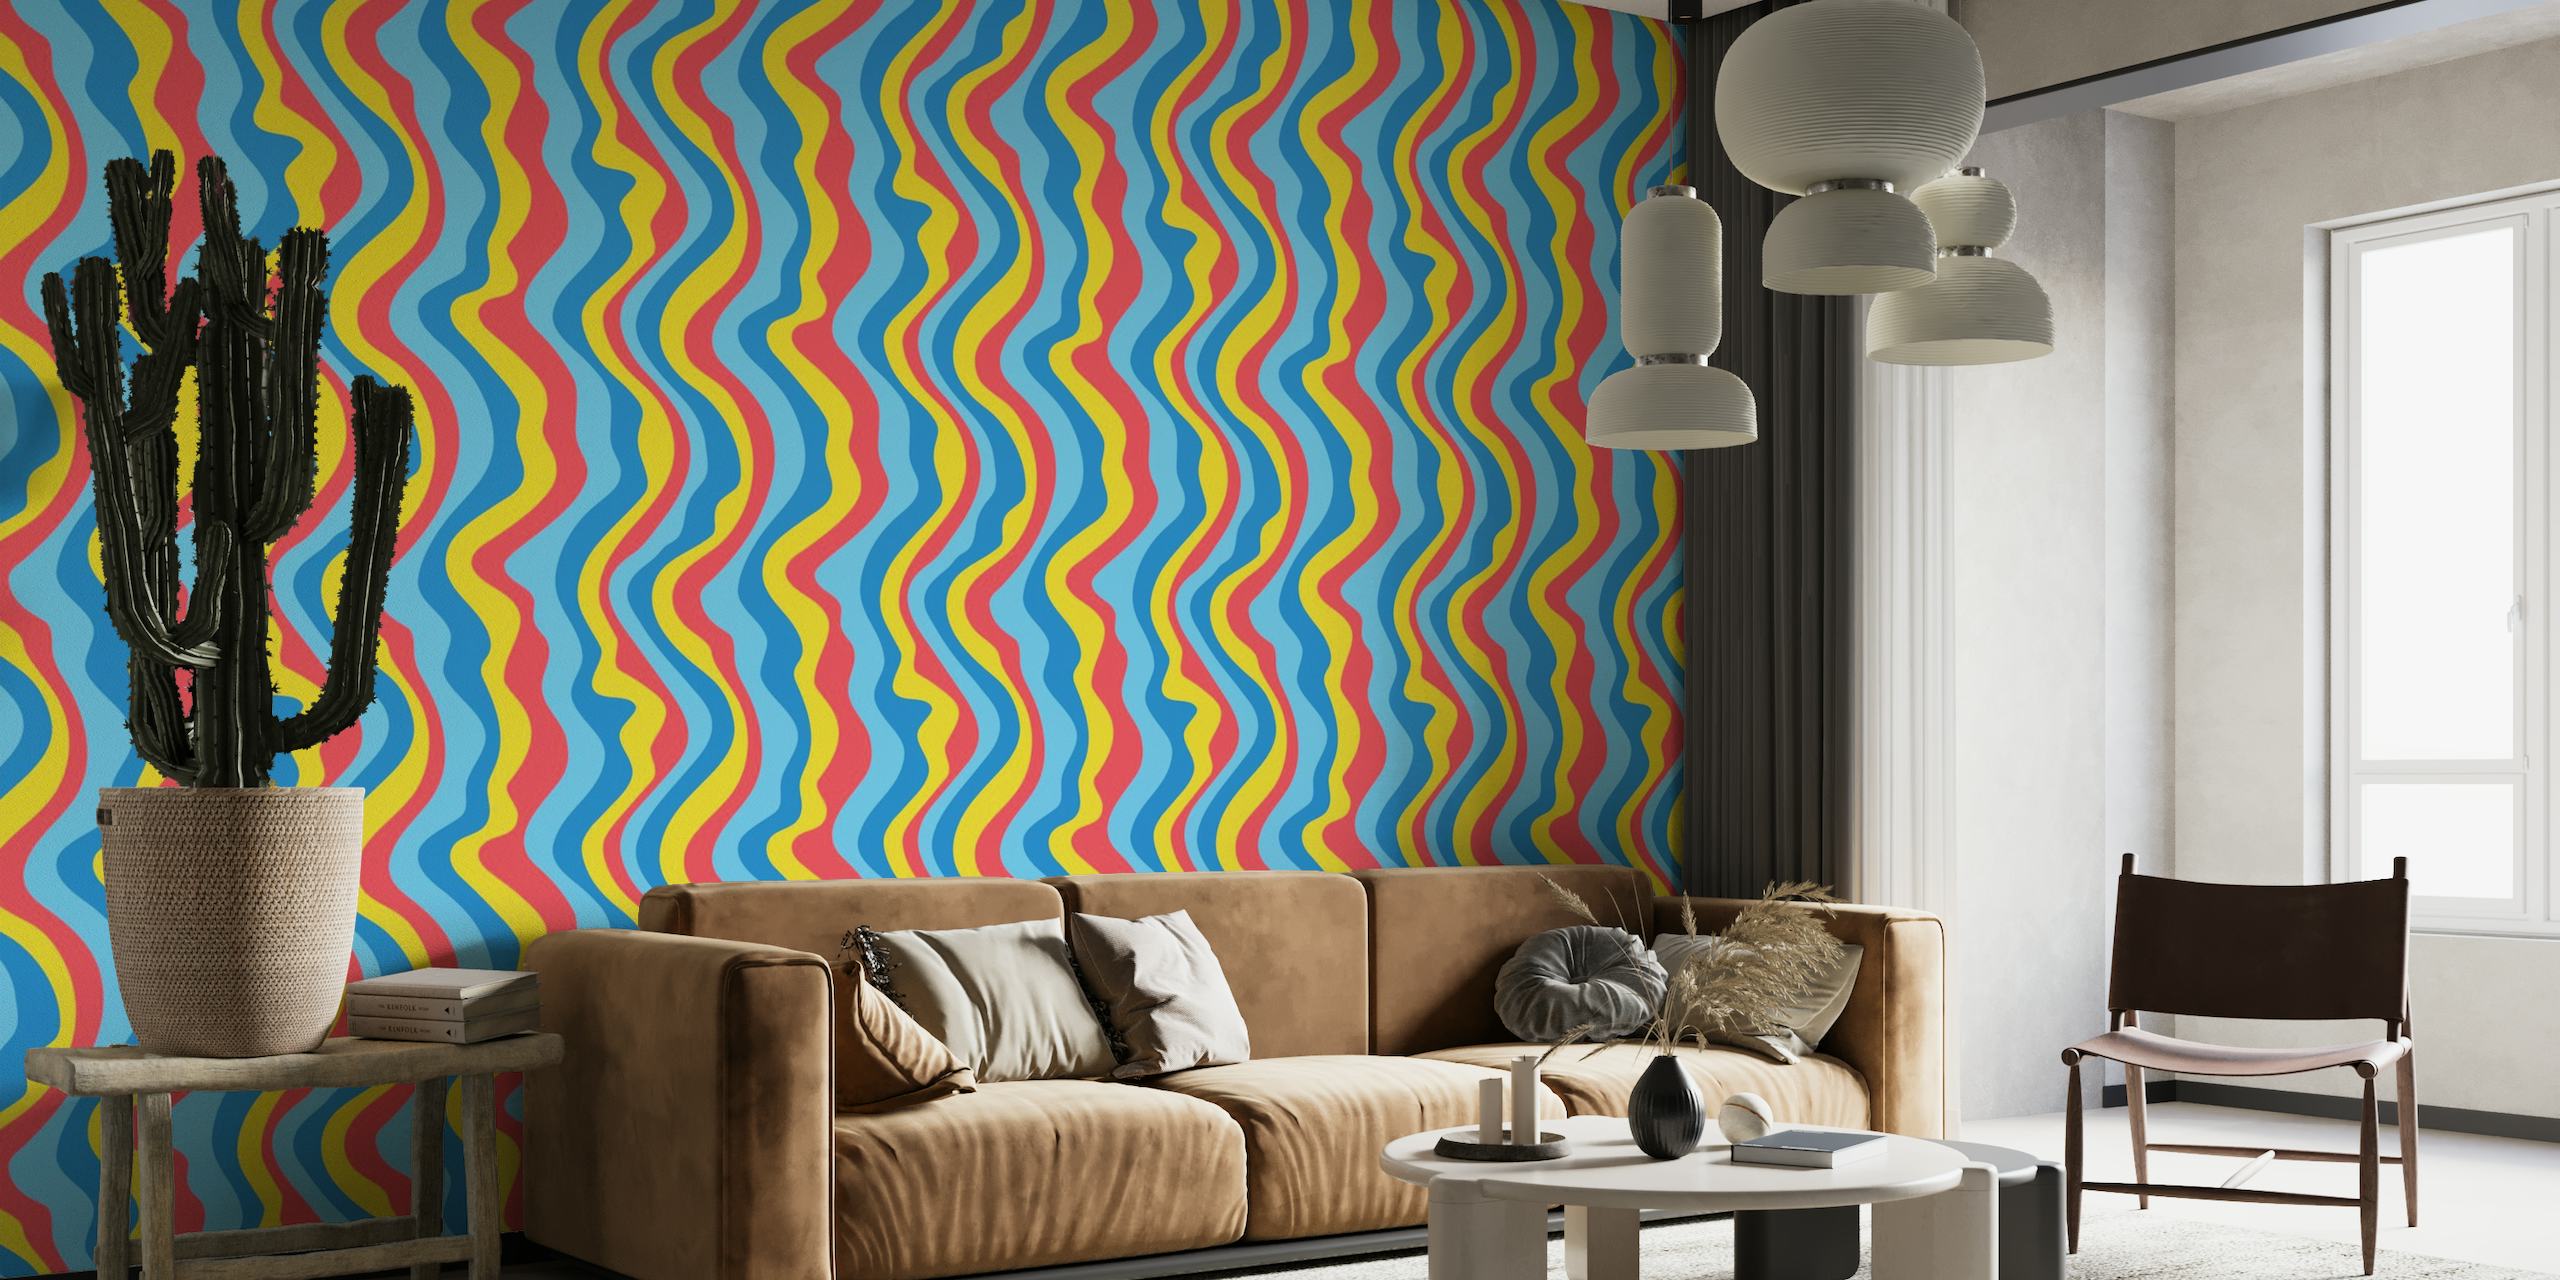 Colorful 'GOOD VIBRATIONS Mod Wavy Stripes Blue Yellow' wall mural design with retro-inspired undulating lines.